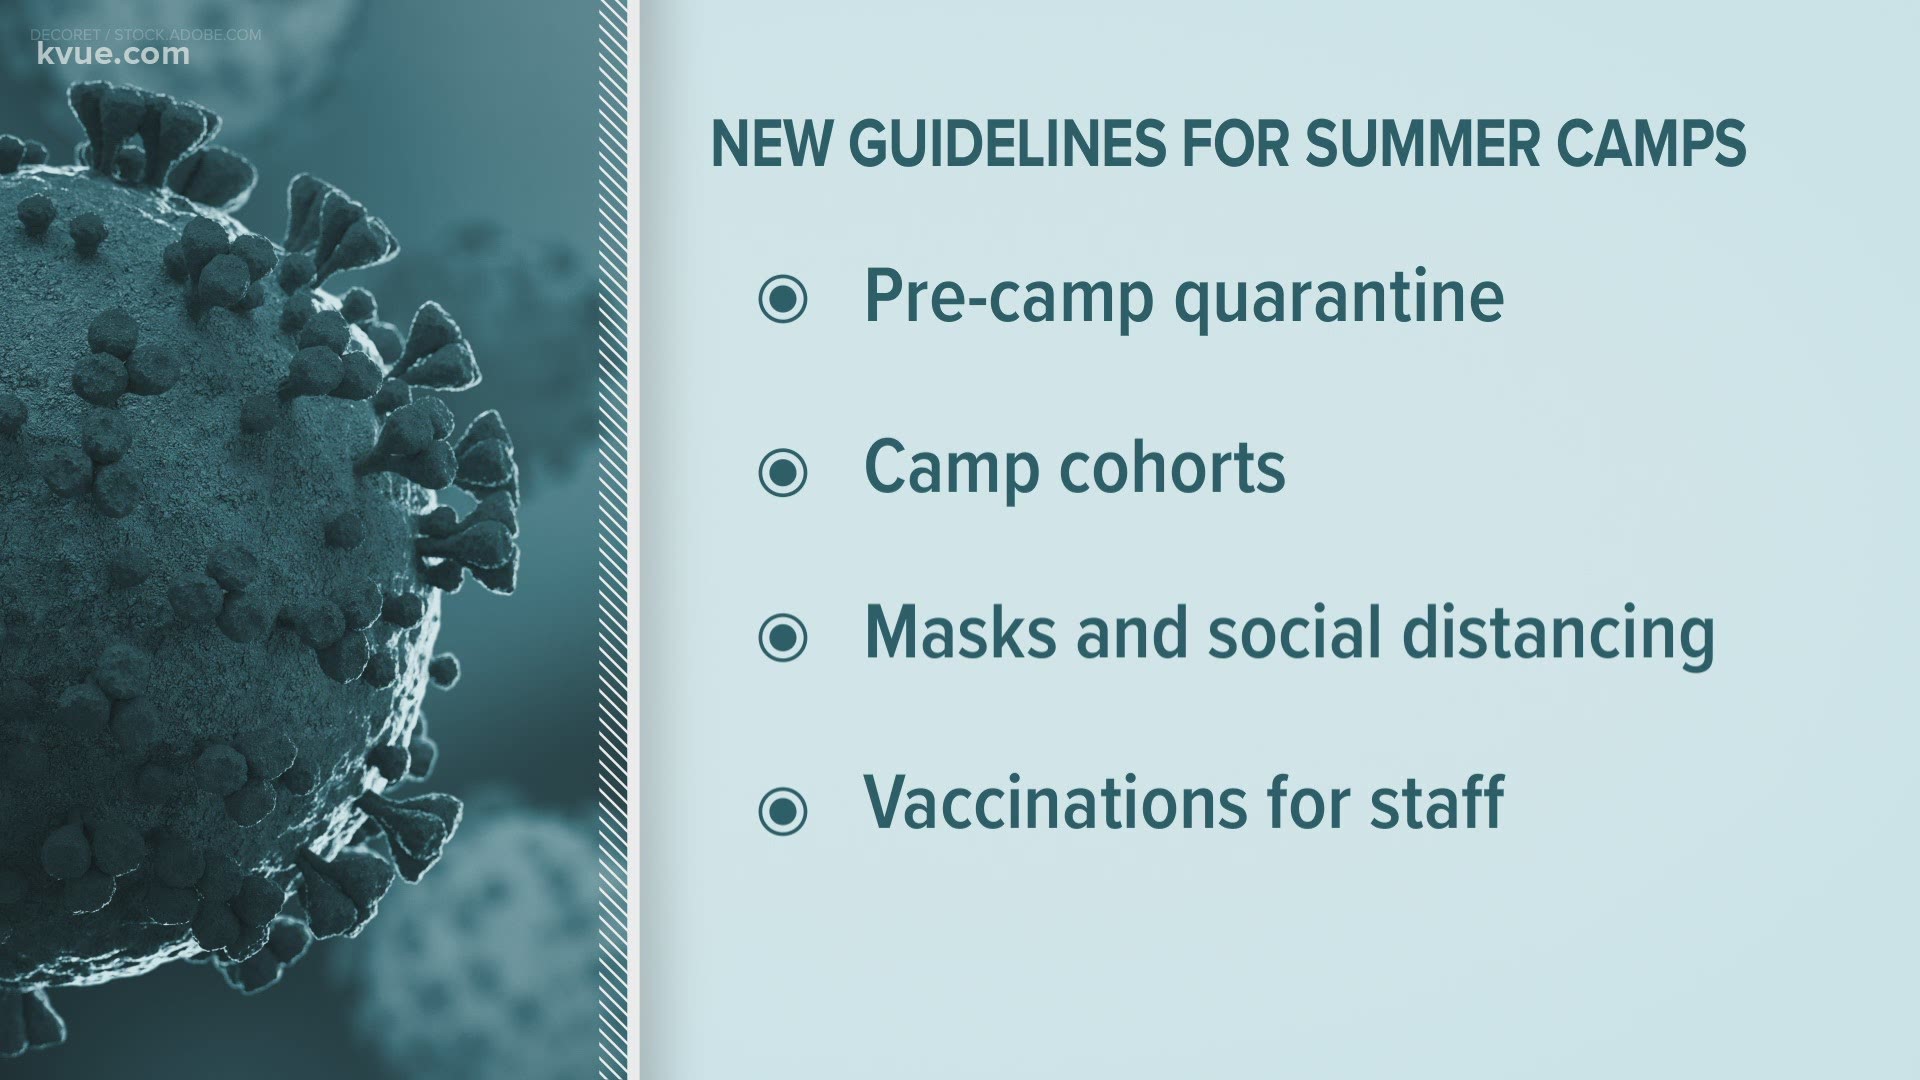 For some Central Texas families, summer means sending kids to camp. But how does that look during a pandemic?